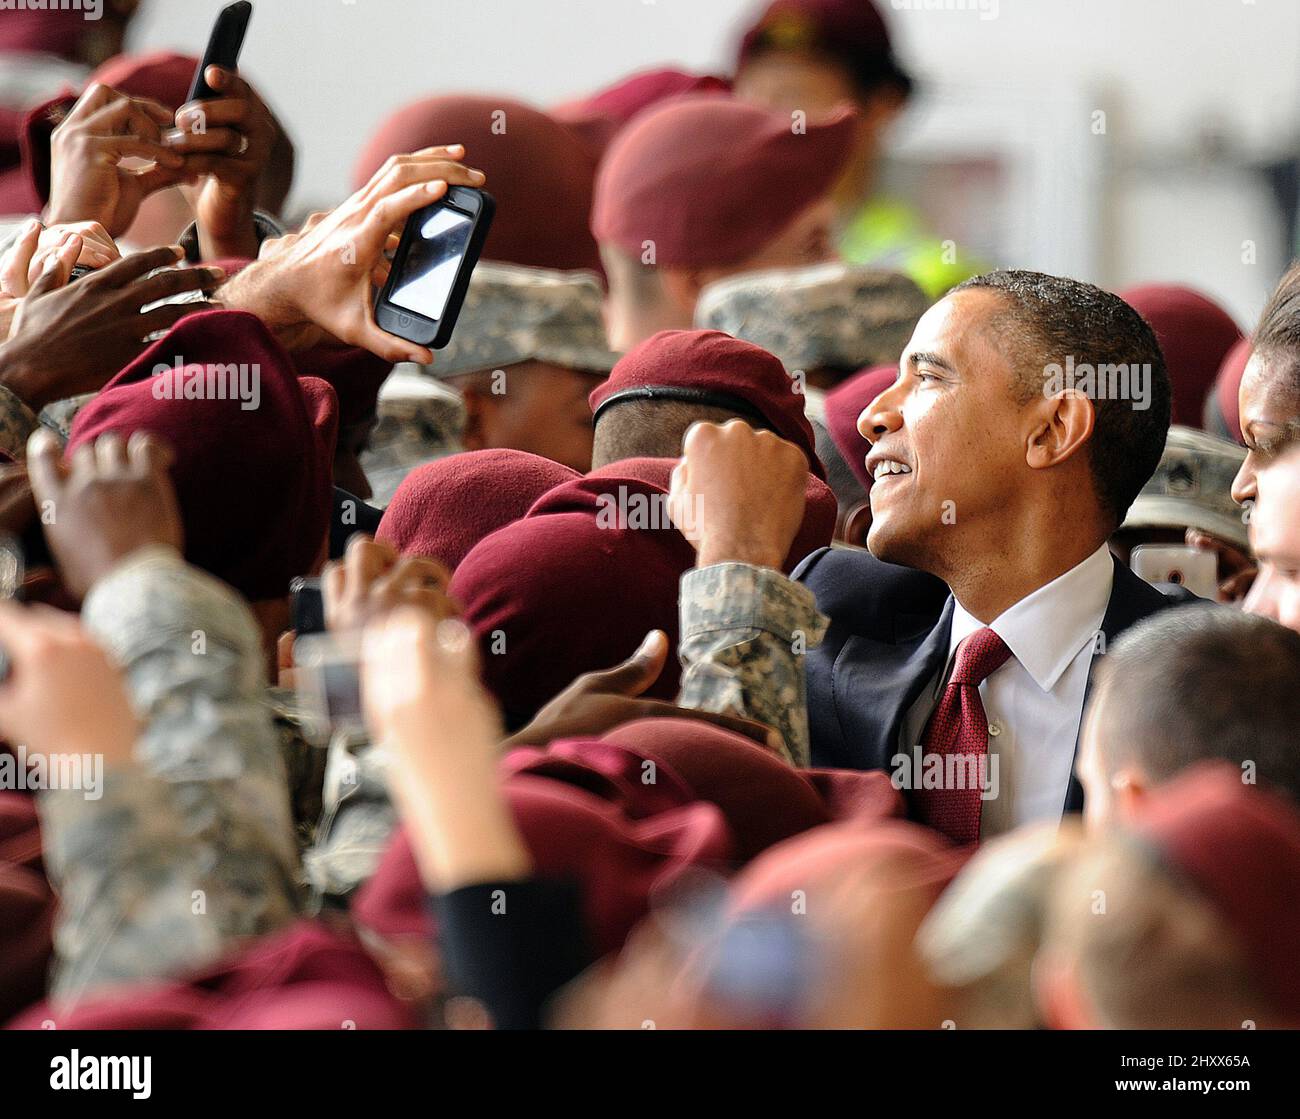 President Barack Obama addressed soldiers Wednesday, December 14, 2011, at Fort Bragg in North Carolina, USA. The president and first lady Michelle Obama thanked the troops for their service in Iraq, marking the fulfillment of a campaign promise to bring home all U.S. forces following a nearly nine-year conflict. Stock Photo